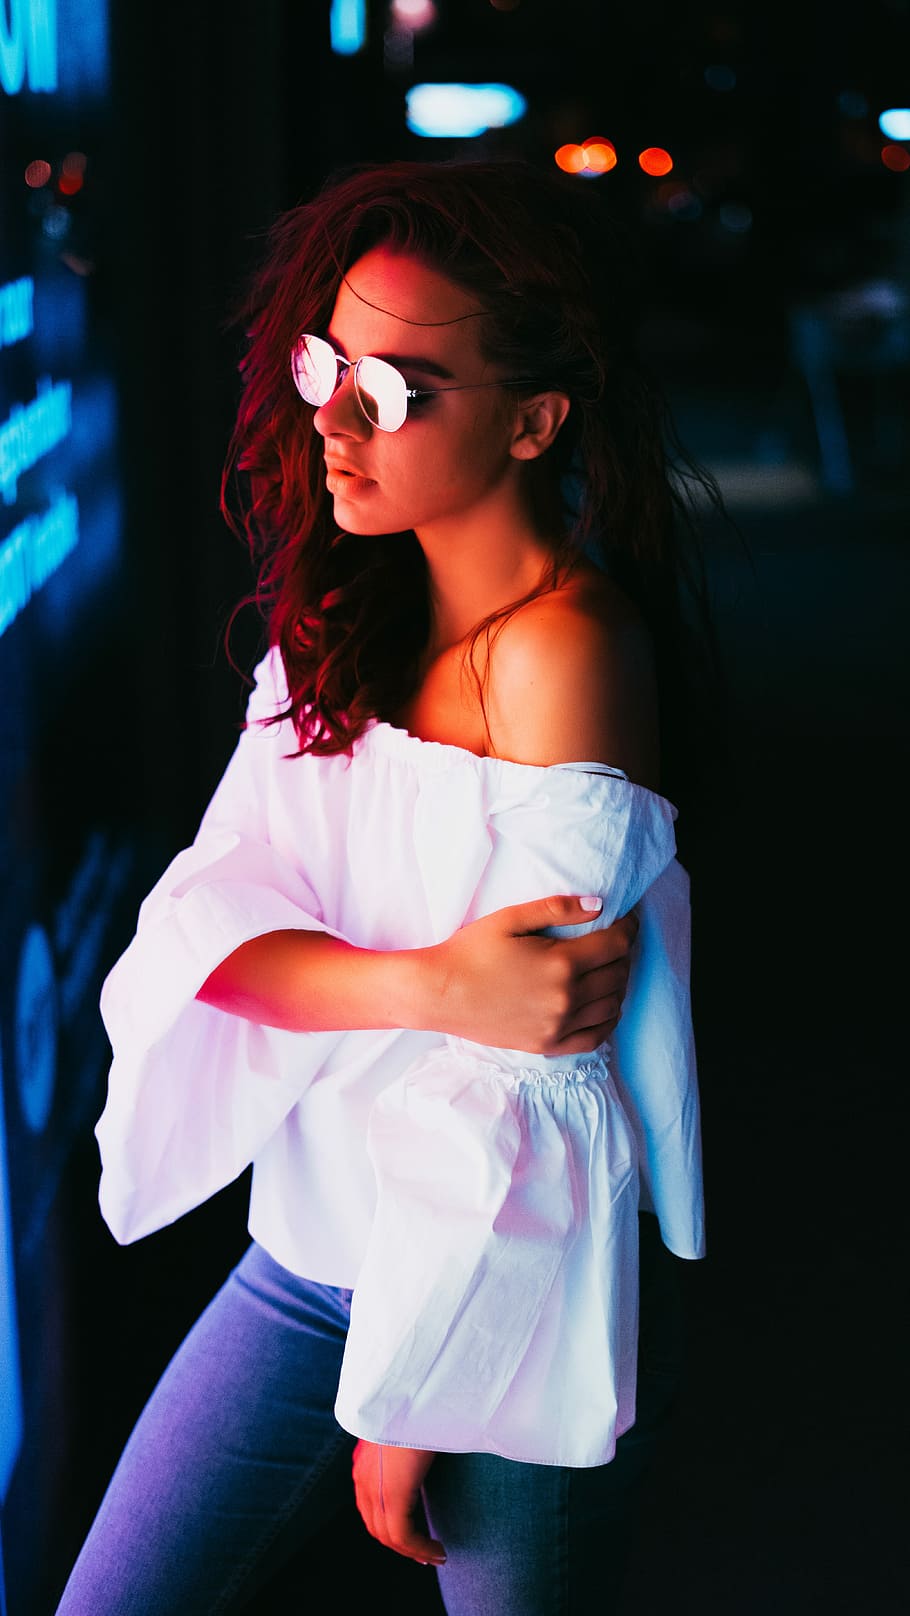 low light photography woman wearing white off-shoulder top, bokeh photography of woman near lights